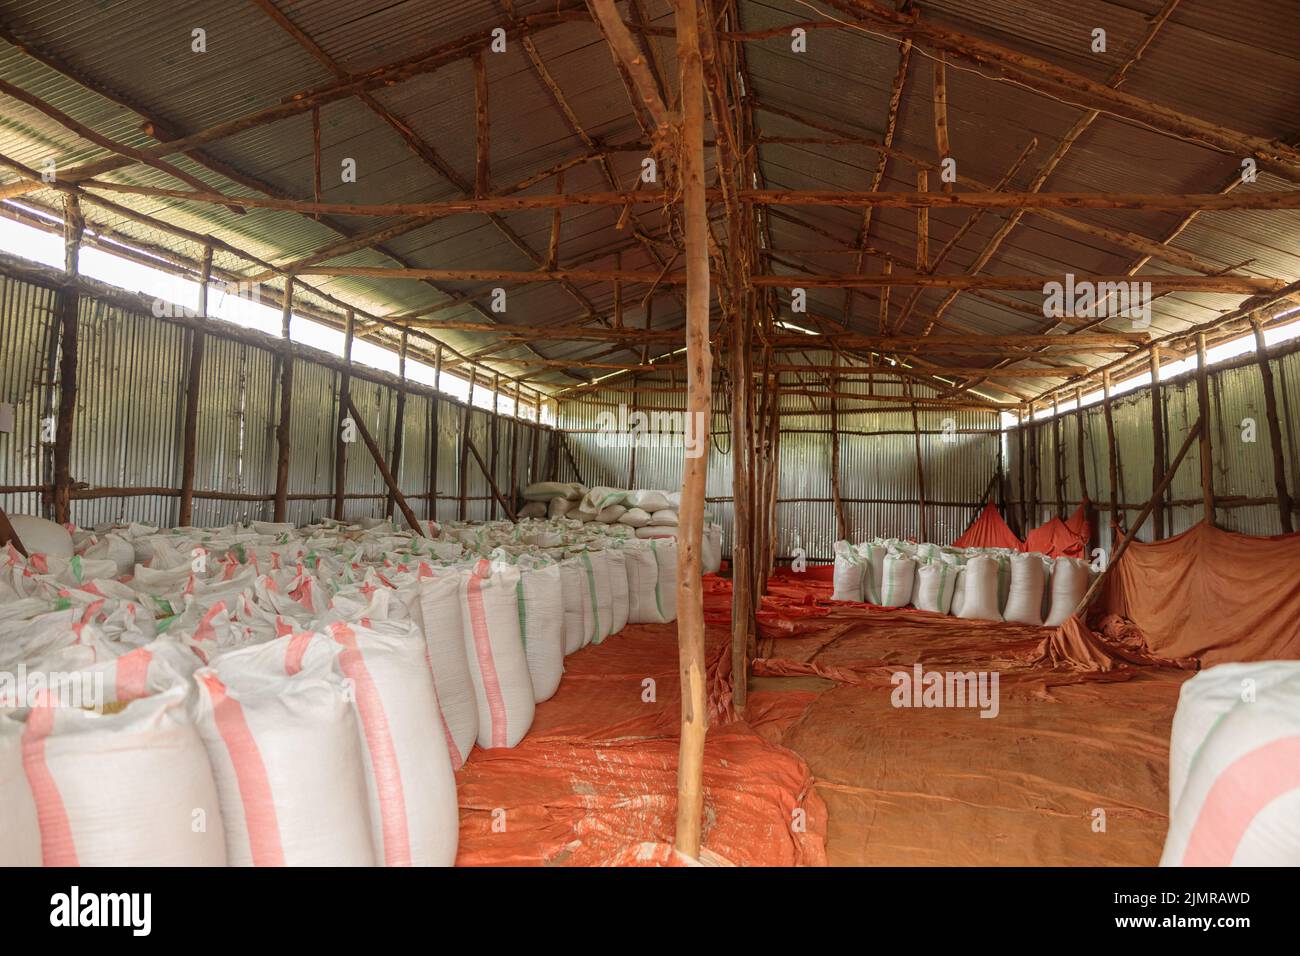 Storage of coffee in a warehouse on a farm Stock Photo